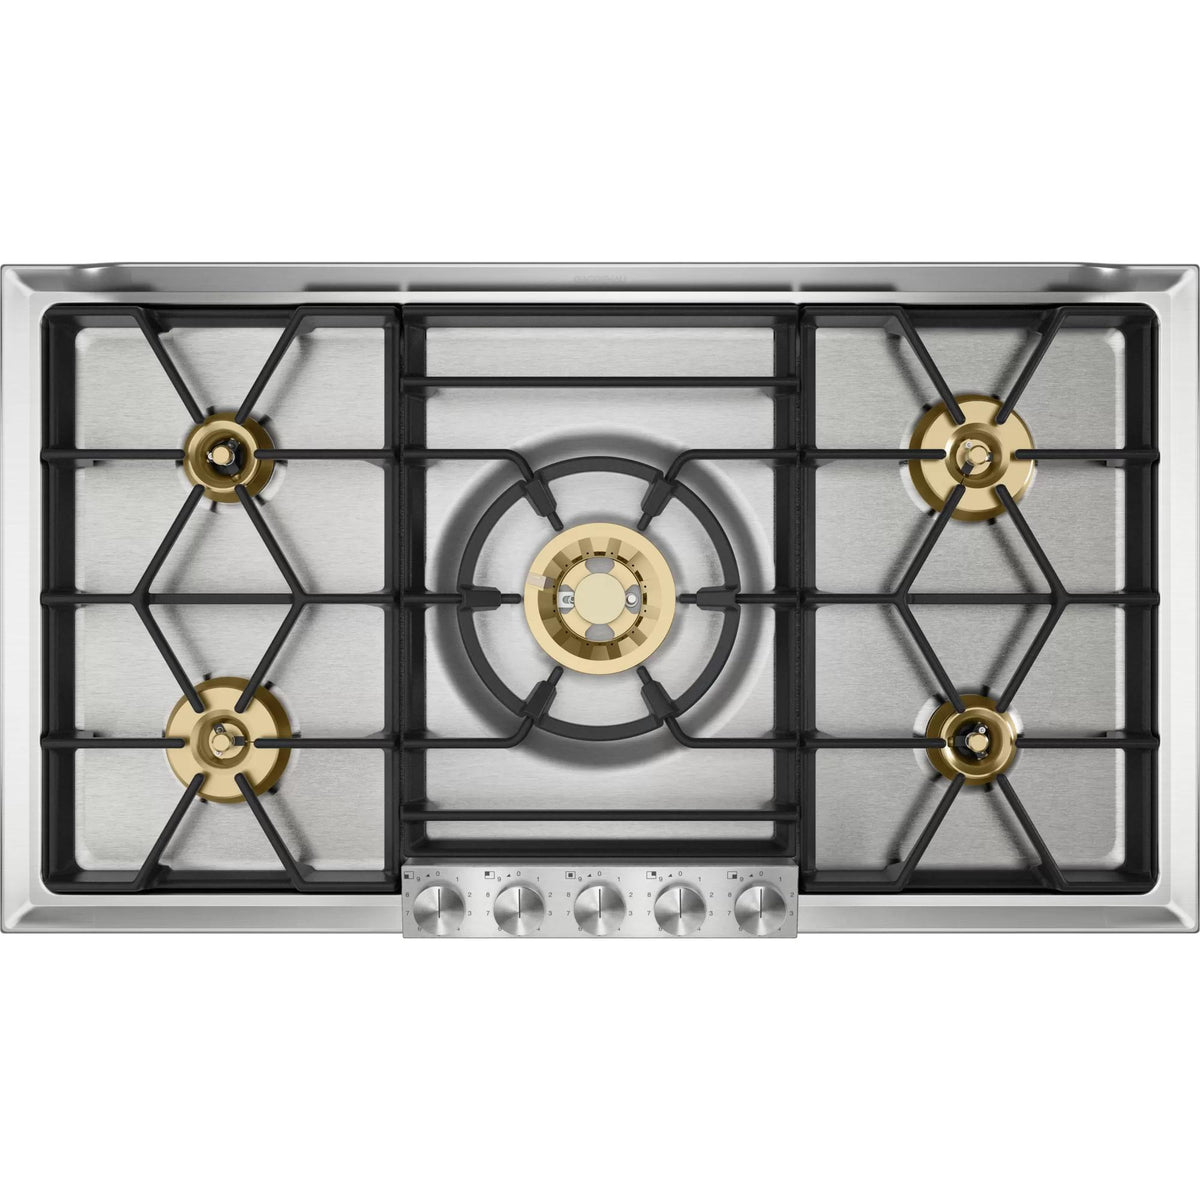 36-inch Built-in Gas Cooktop with Wok Burner VG295150CA IMAGE 1